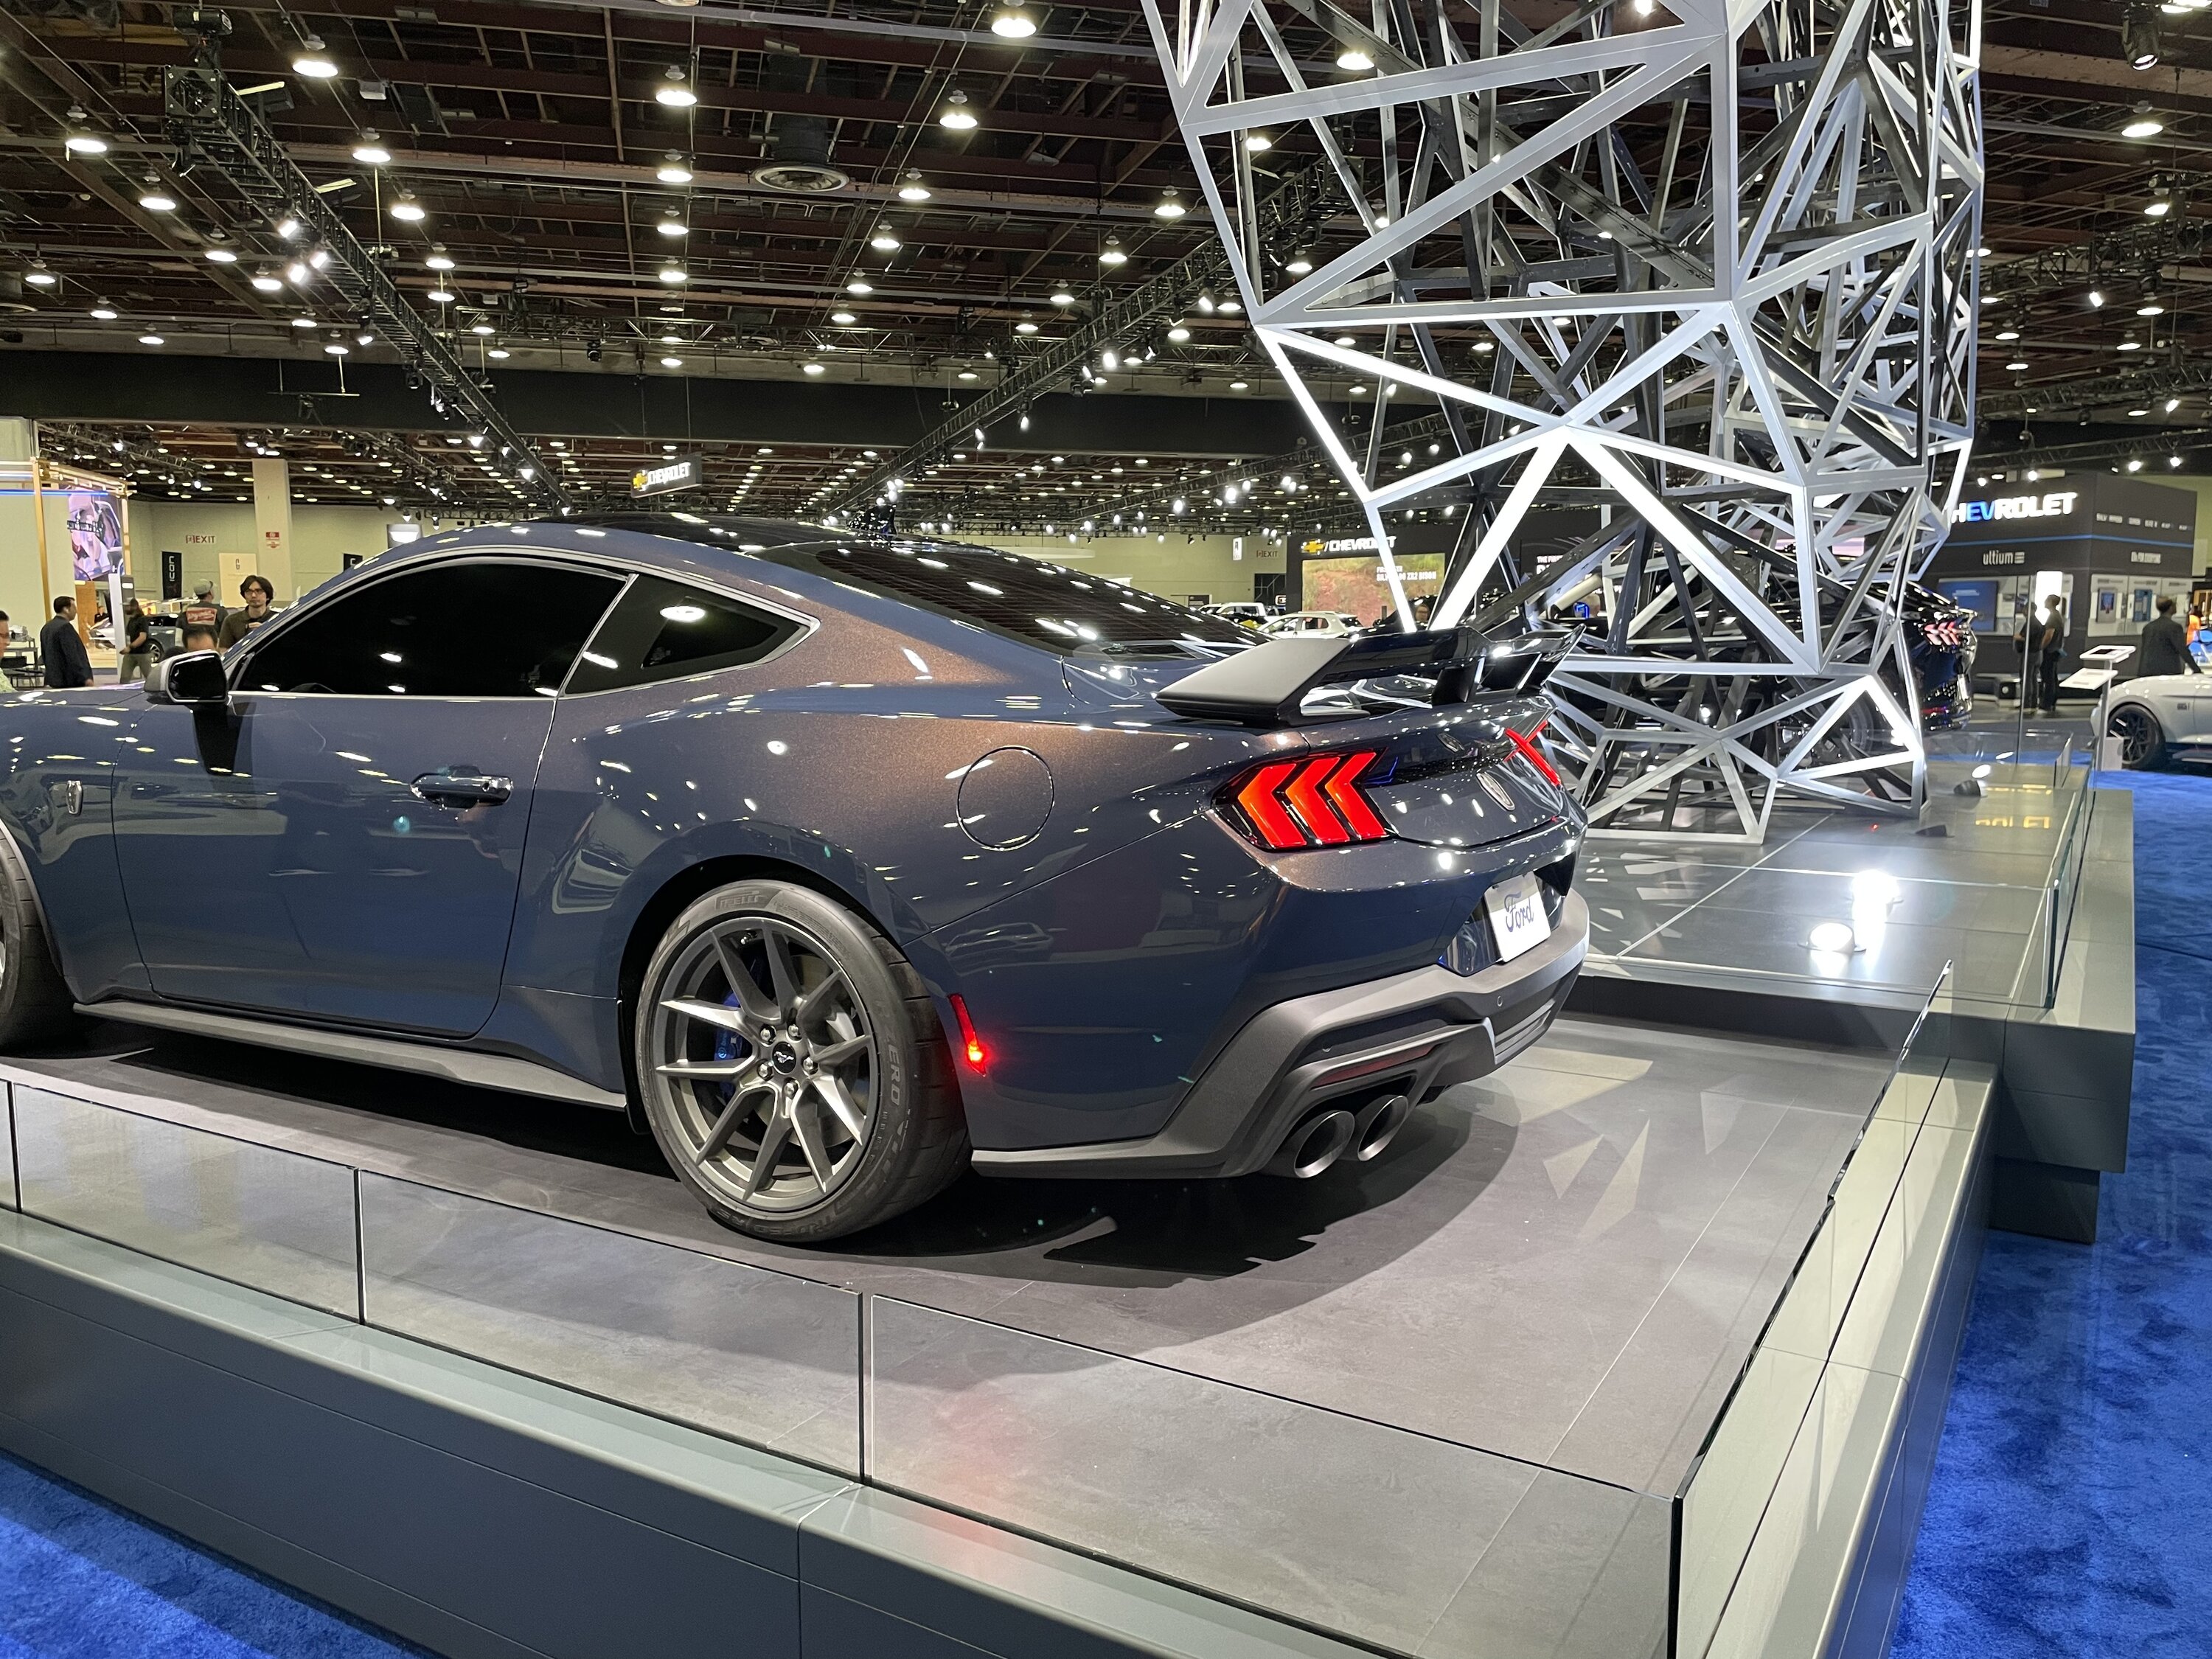 S650 Mustang S650 pics from reveal night and showfloor of 2022 Detroit Auto Show fd2ab7a1-a82d-4968-8017-08da0cae72ba-jpeg-